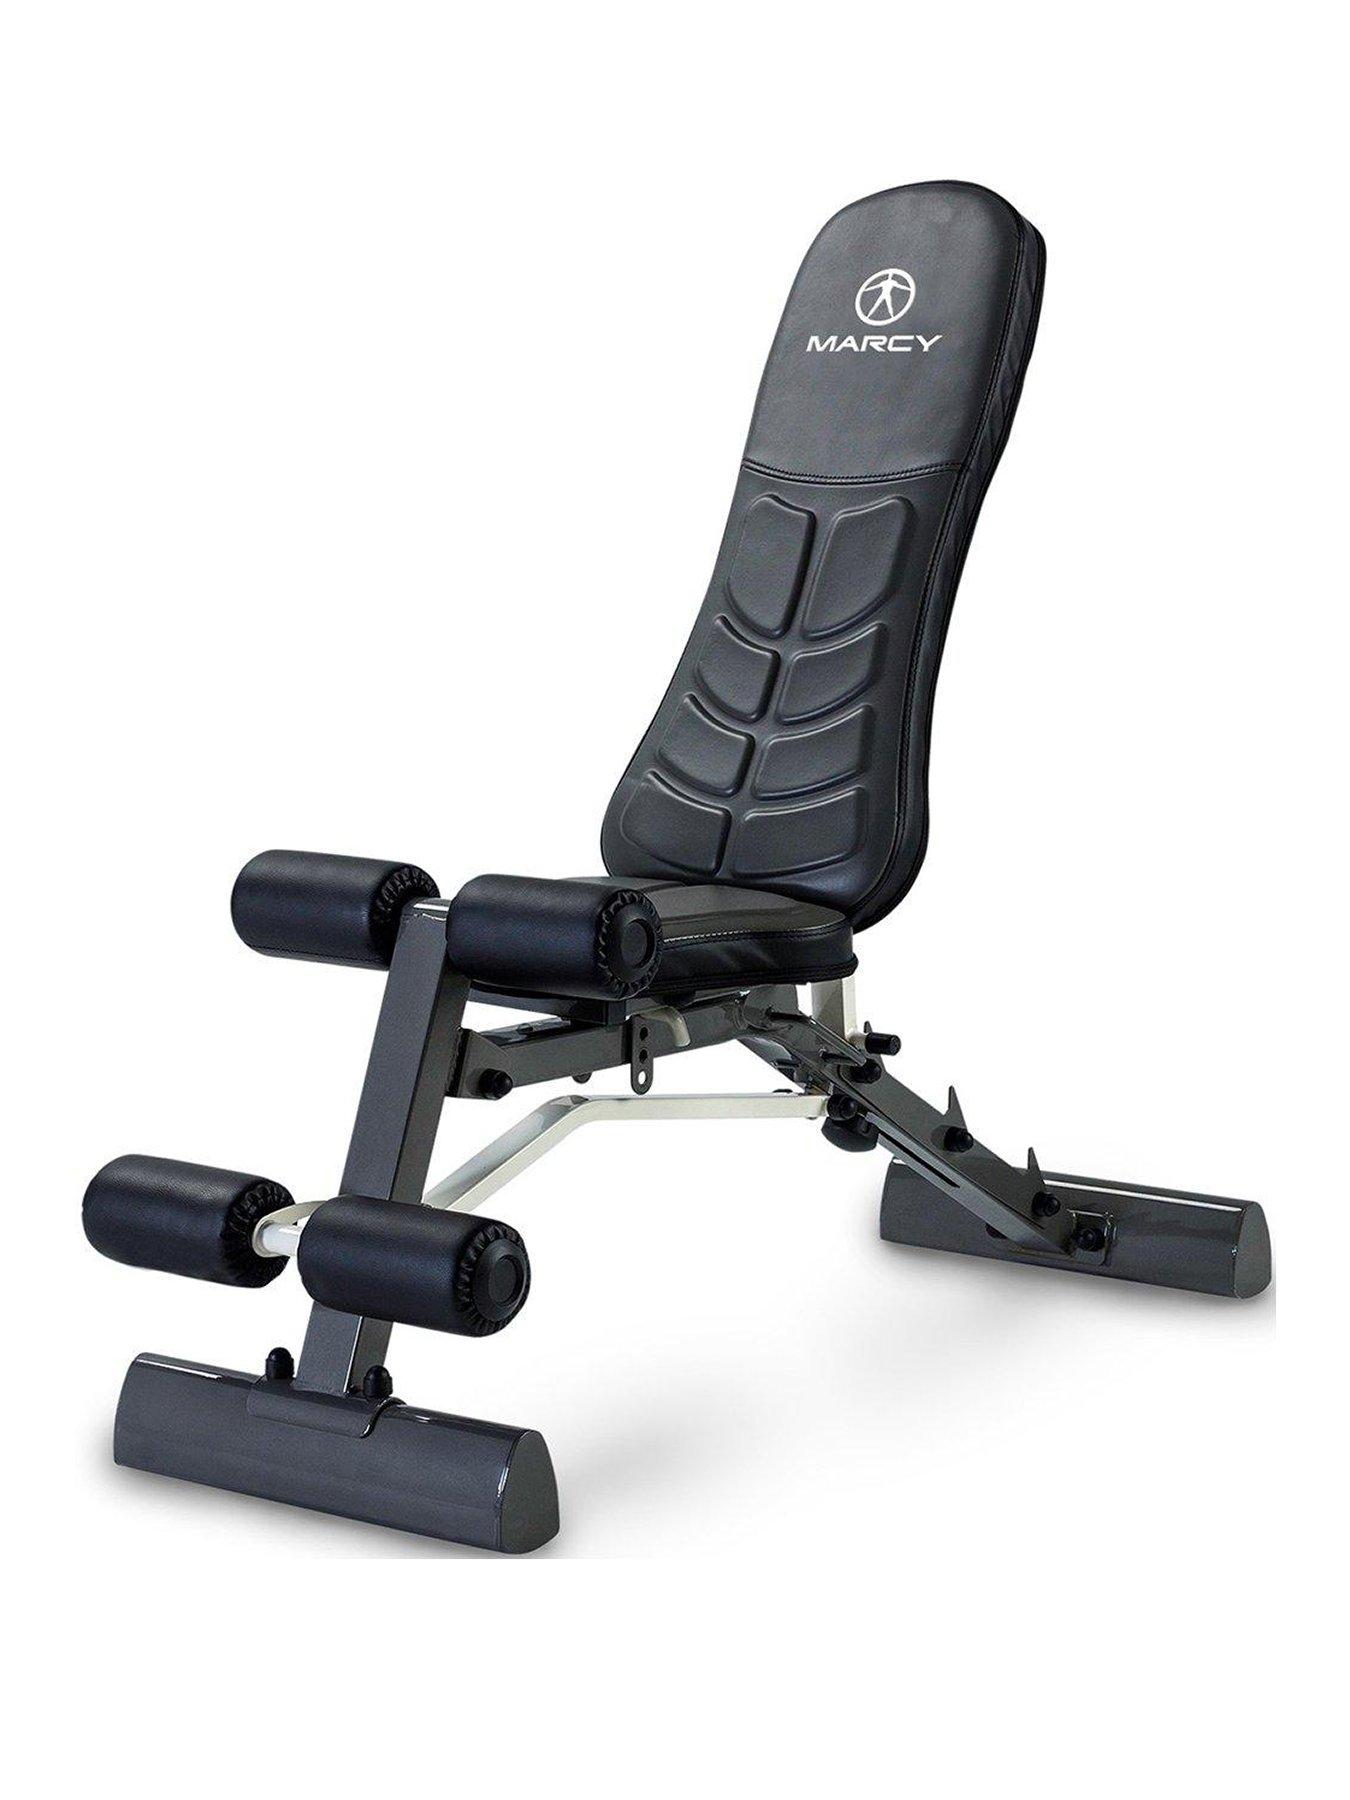 Marcy Foldaway Deluxe Utility Dumbbell Bench